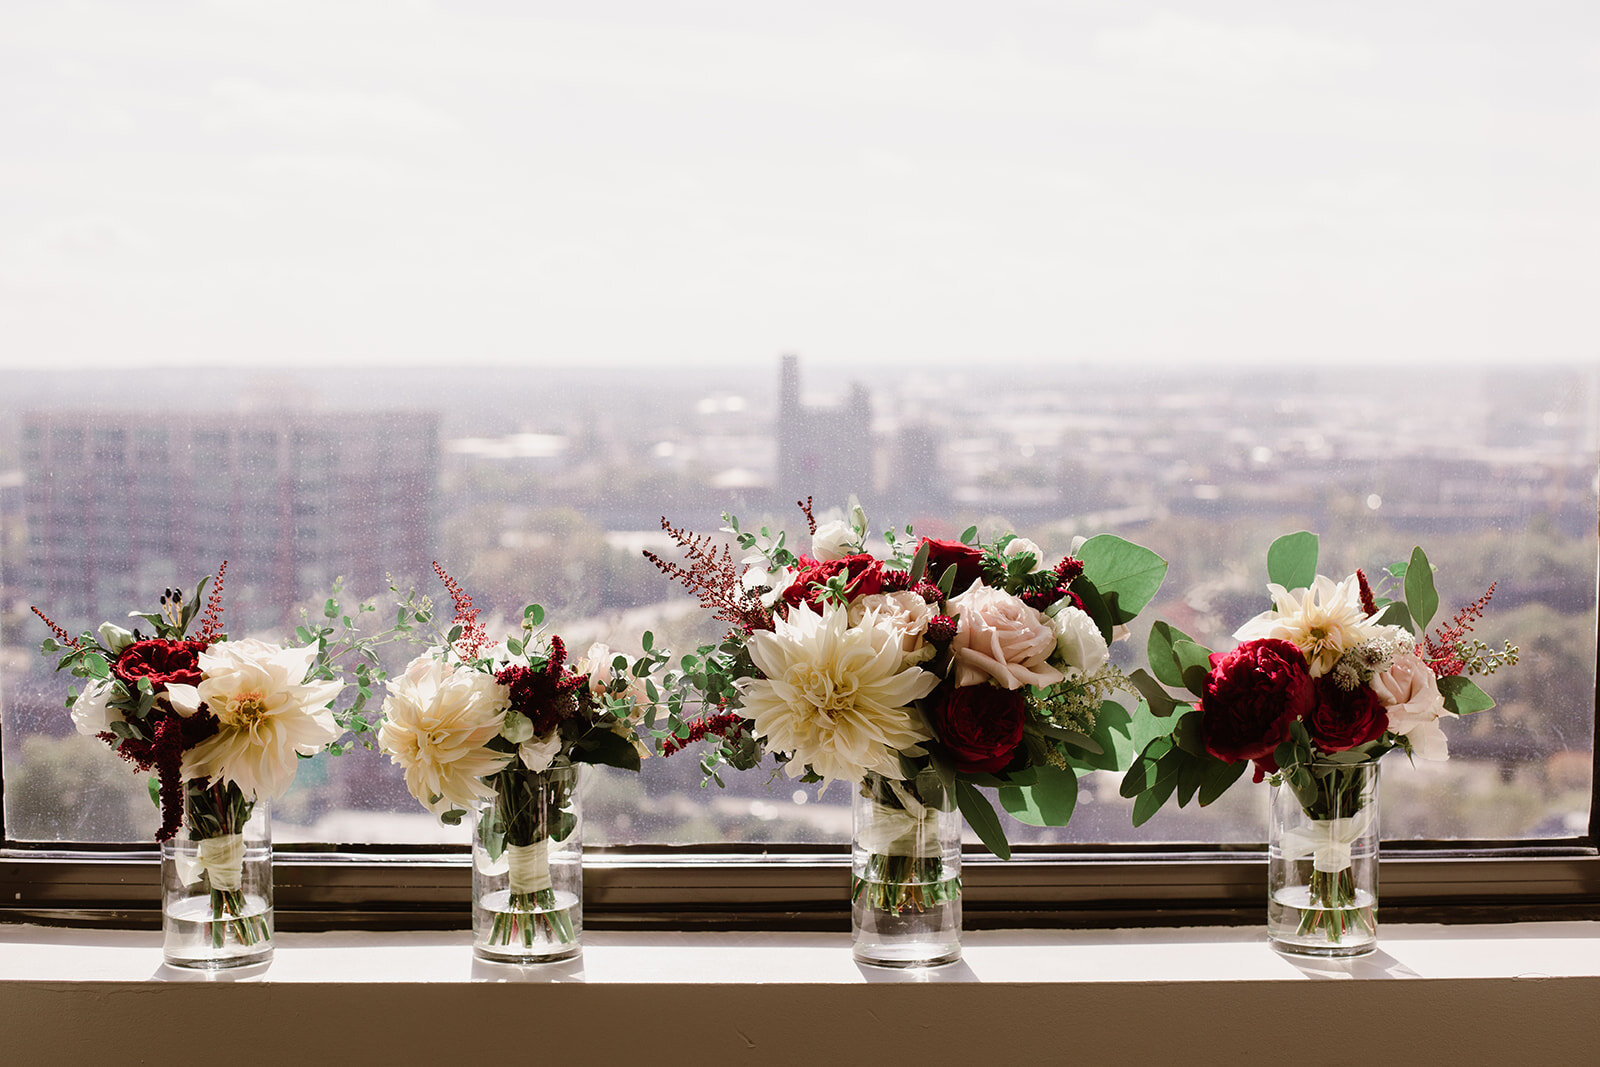 Cafe au lait dahlias and red peony wedding florals | Black tie wedding with a red tux and custom Anne Barge gown | Romantic wedding at St. Bridget and The Omni Hotel in Richmond, VA.